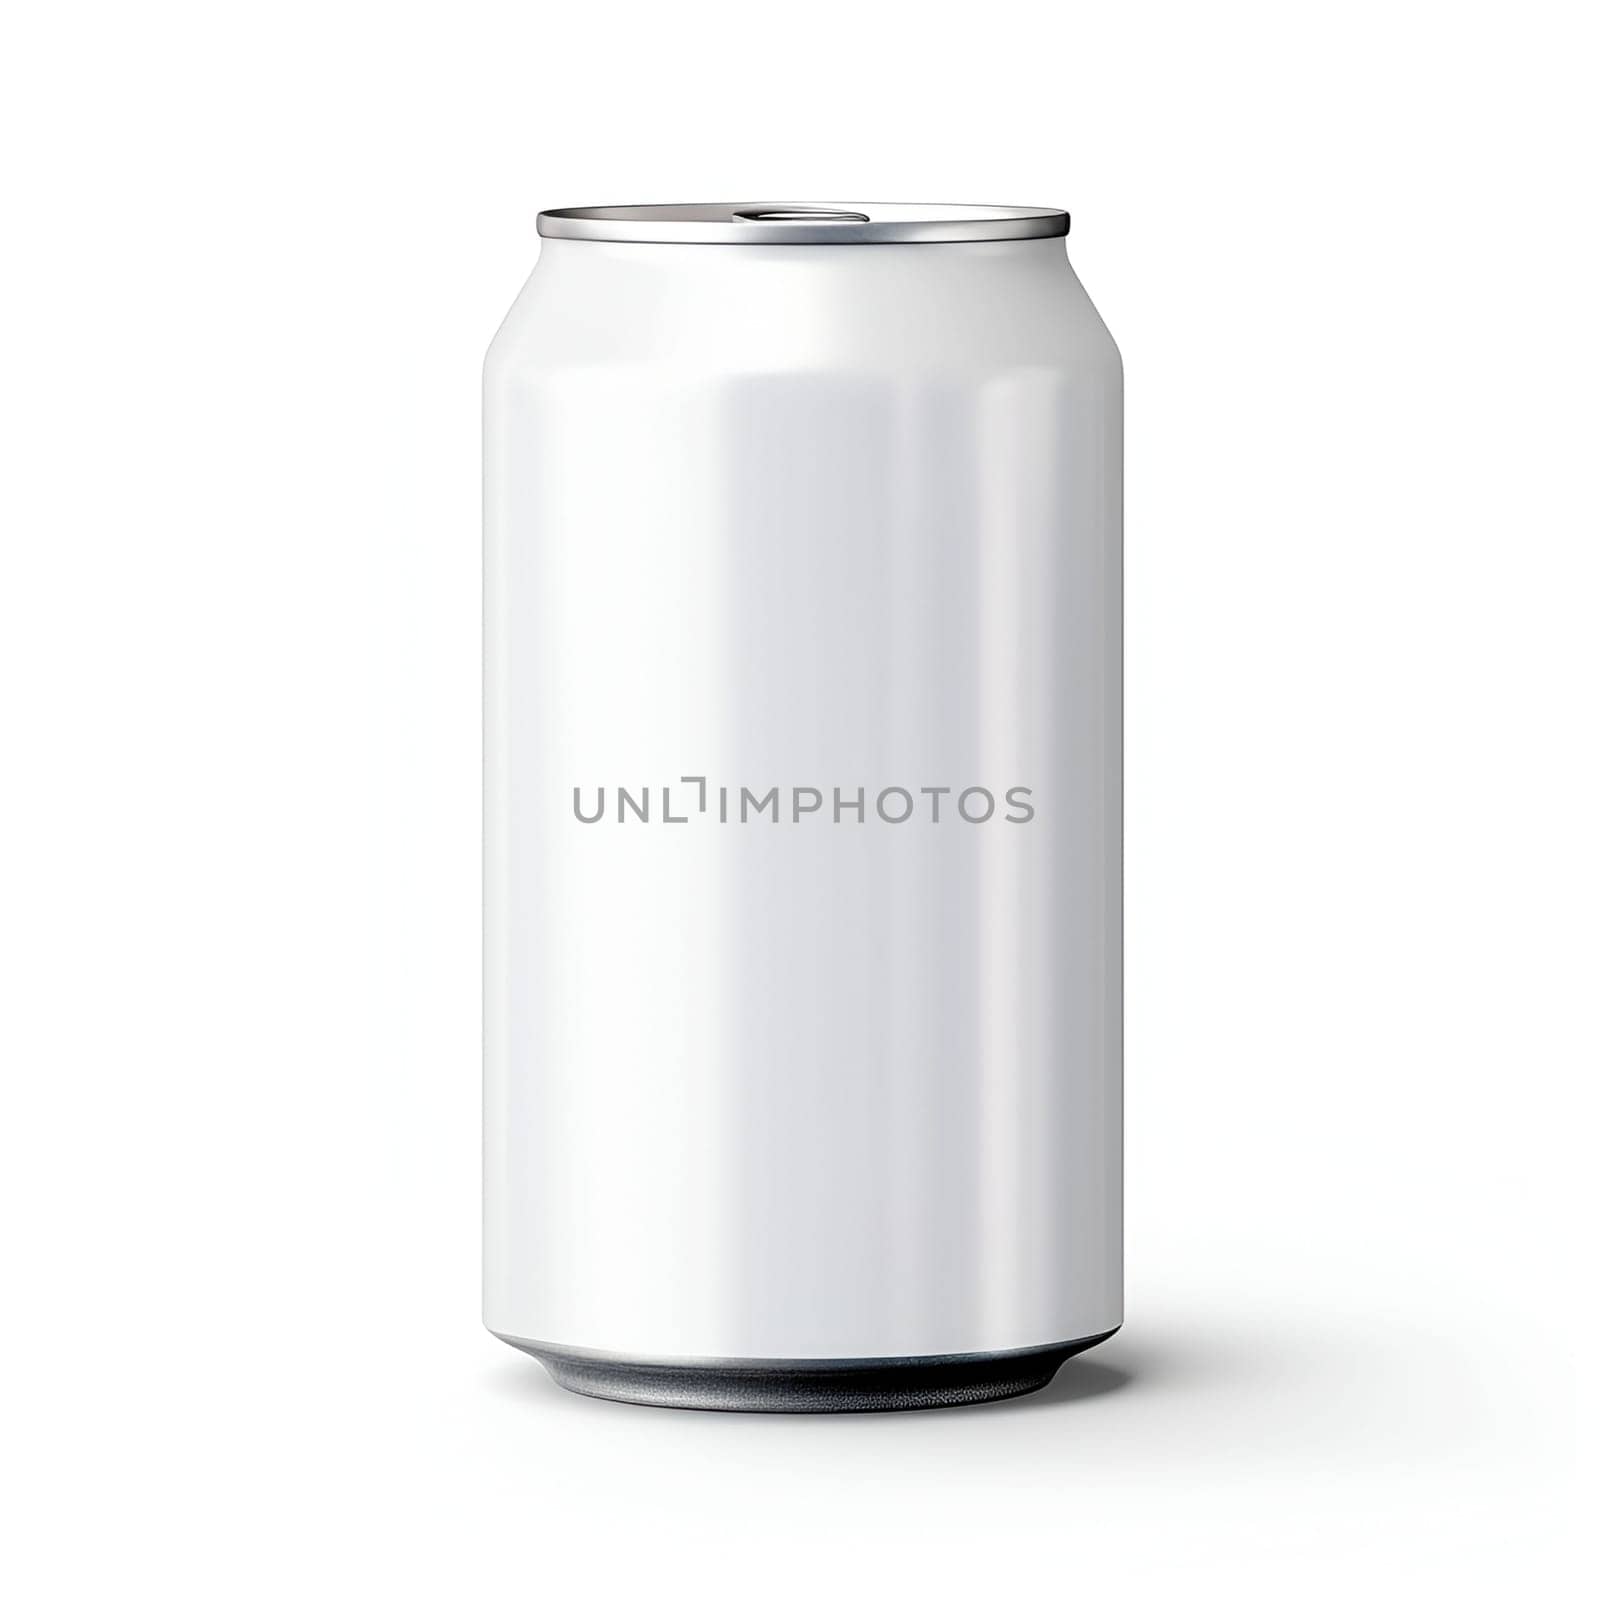 330 ml aluminum drink soda can isolated on white background. Aluminum beer can 330 ml with trim